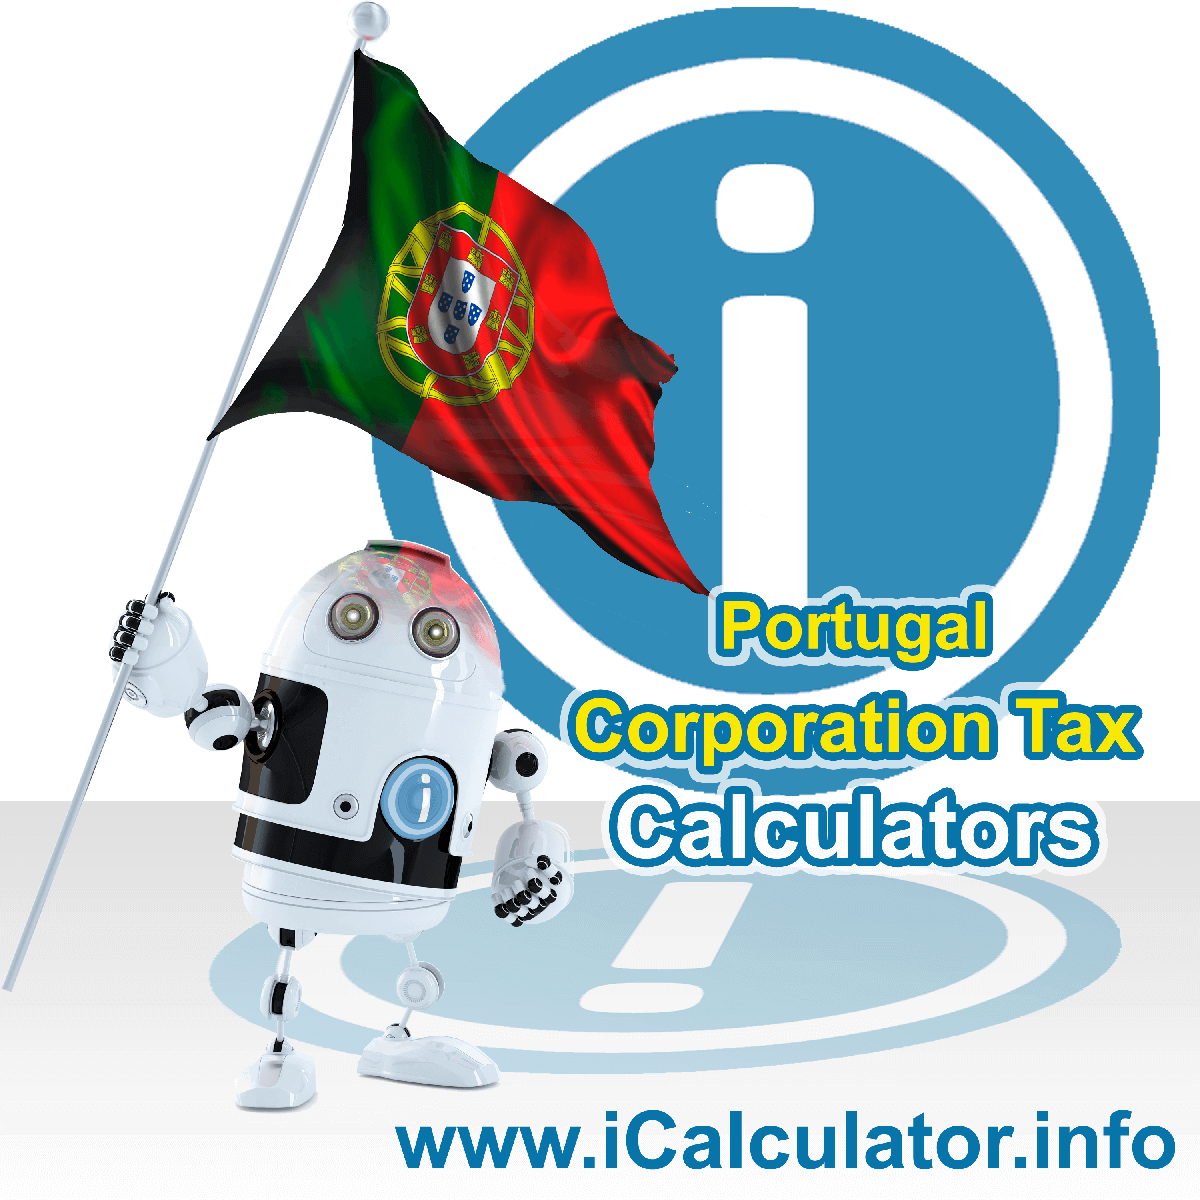 Portugal Corporation Tax Calculator. This image shows the Portugal flag and information relating to the corporation tax rate formula used for calculating Corporation Tax in Portugal using the Portugal Corporation Tax Calculator in 2023